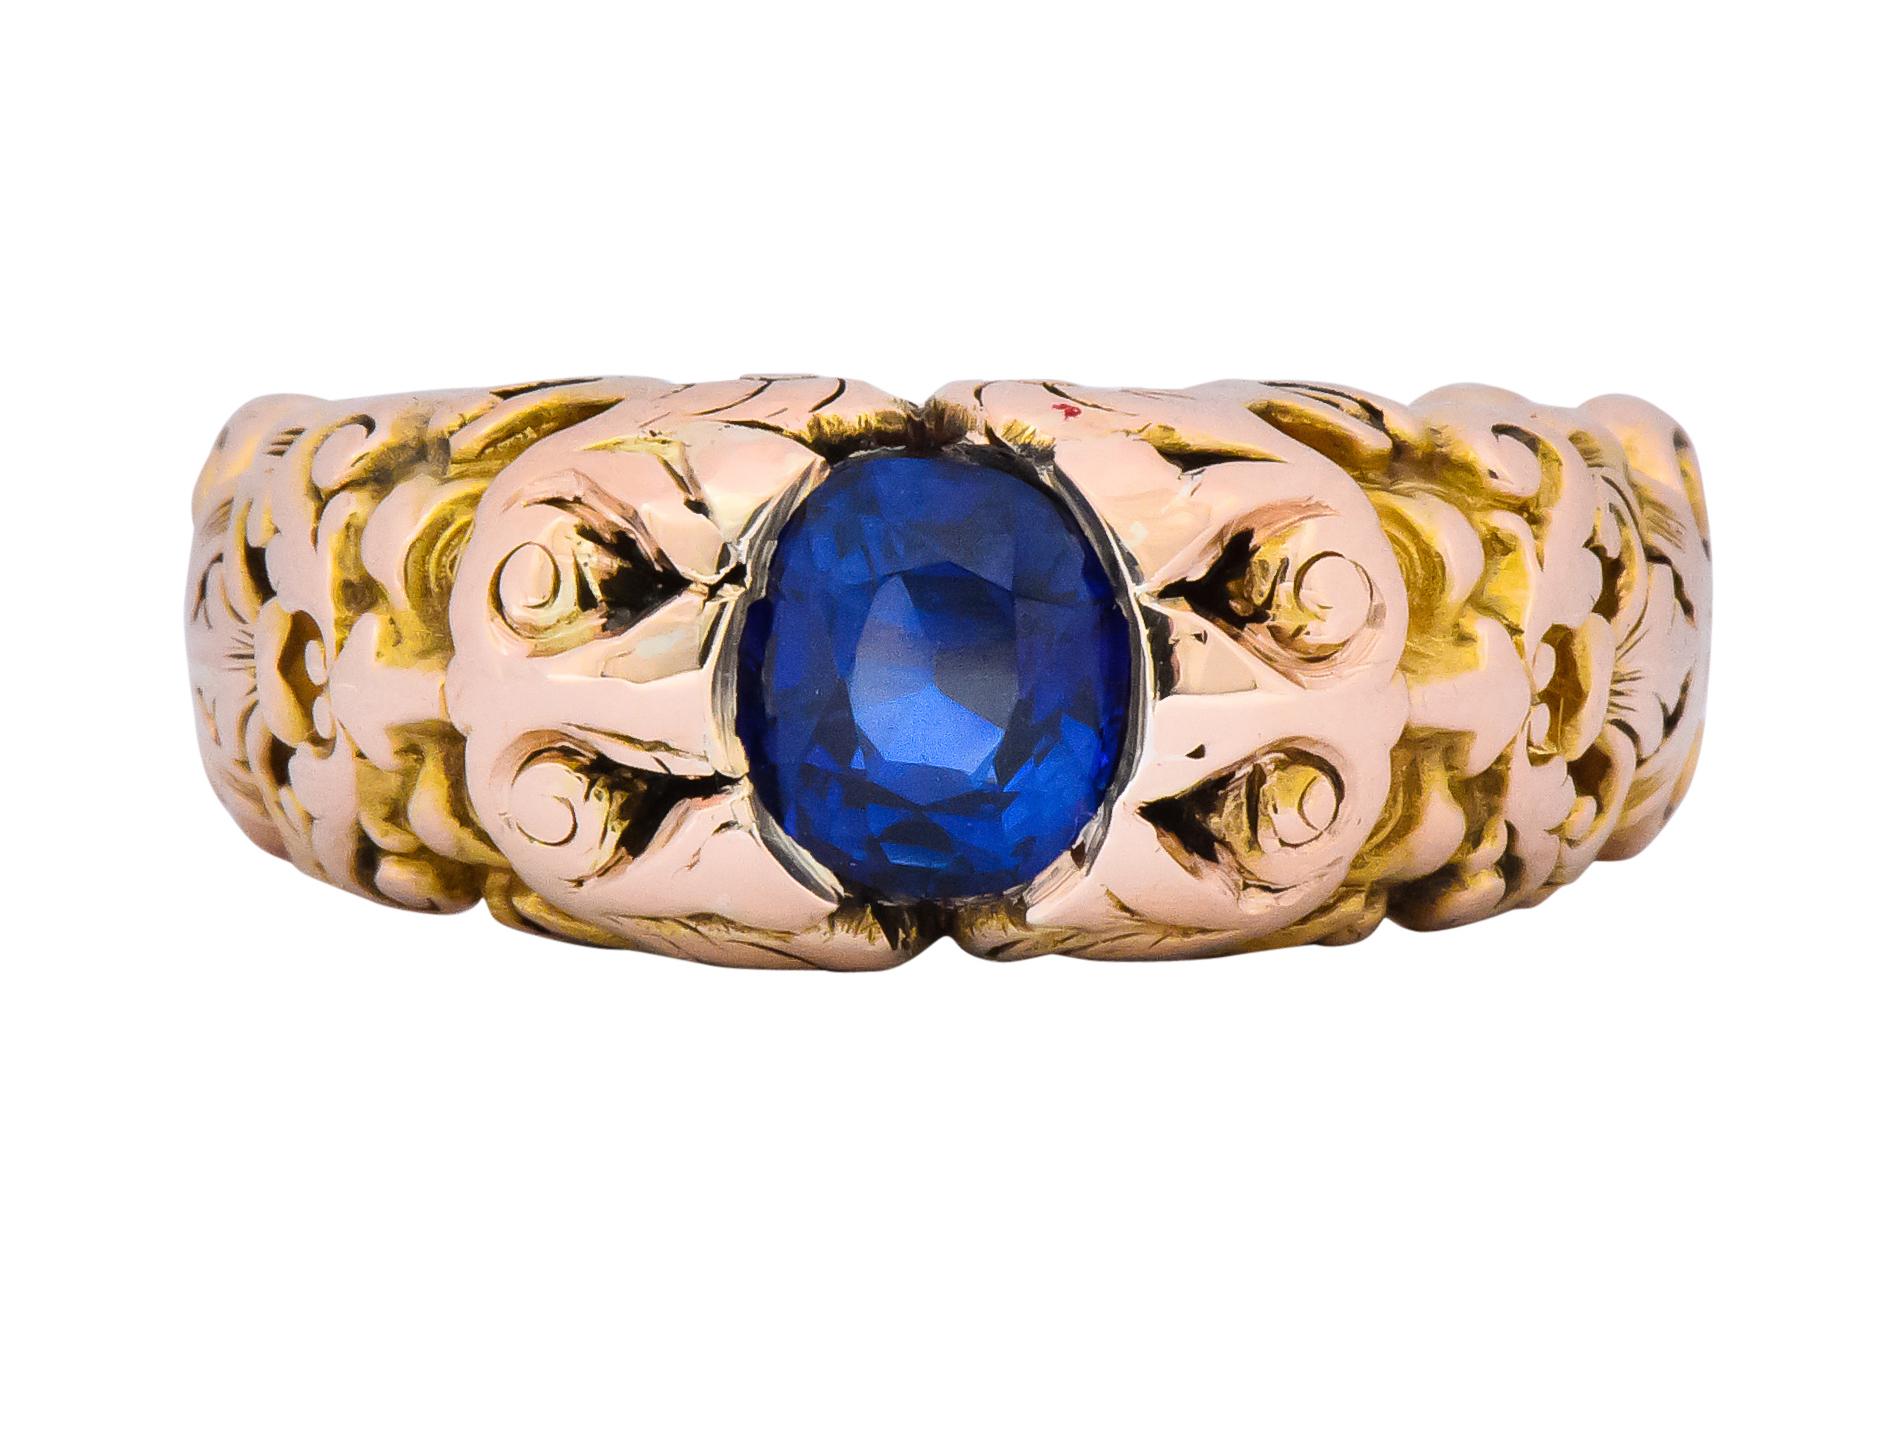 Centering an oval cut sapphire weighing 1.32 carats, bright blue with no evidence of heat treatment

Partial bezel setting

With incredibly detailed mount depicting Anemoi, the god of wind on both sides

Deeply engraved gold with pierced, scrolling